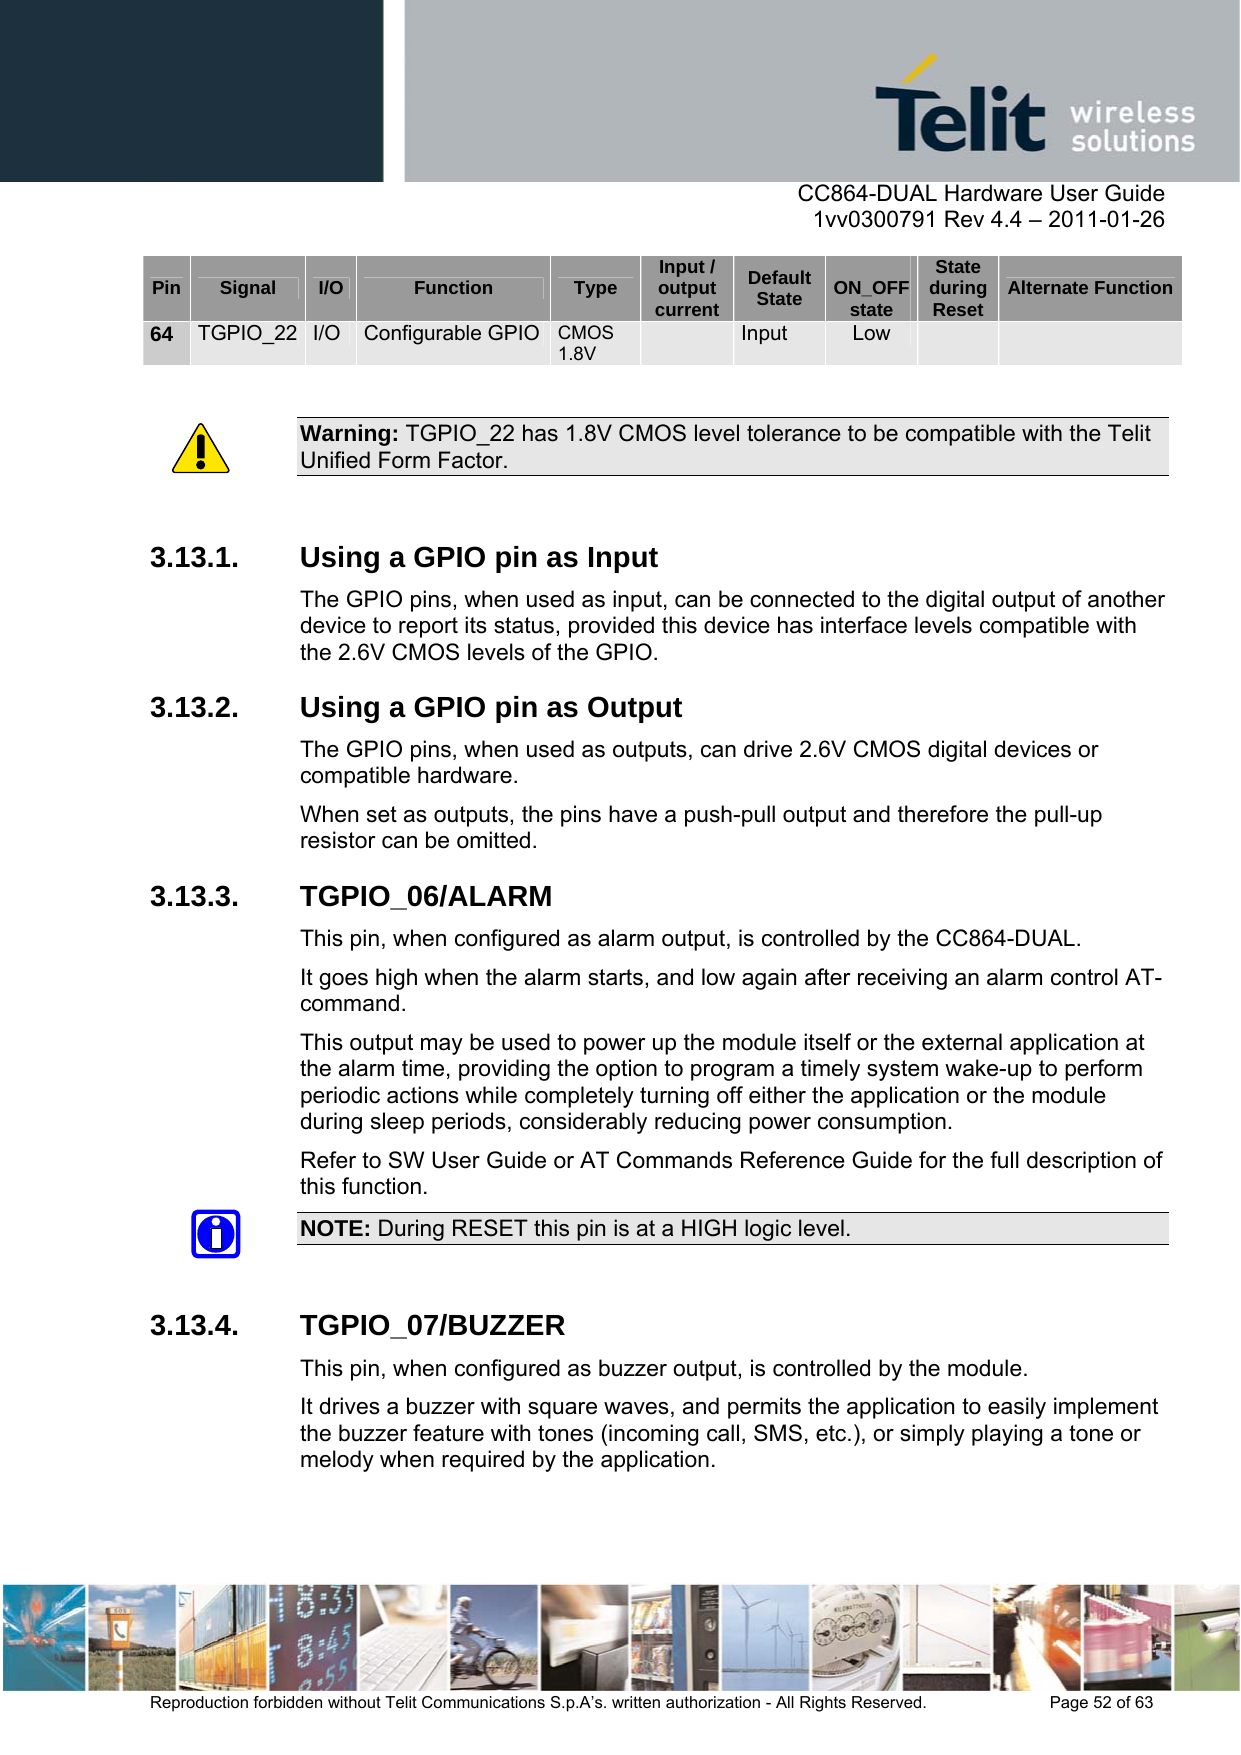      CC864-DUAL Hardware User Guide    1vv0300791 Rev 4.4 – 2011-01-26  Reproduction forbidden without Telit Communications S.p.A’s. written authorization - All Rights Reserved.    Page 52 of 63  Pin  Signal  I/O  Function  Type  Input / output currentDefault State  ON_OFF state State during Reset  Alternate Function64  TGPIO_22  I/O  Configurable GPIO CMOS 1.8V   Input  Low      Warning: TGPIO_22 has 1.8V CMOS level tolerance to be compatible with the Telit Unified Form Factor.  3.13.1.  Using a GPIO pin as Input The GPIO pins, when used as input, can be connected to the digital output of another device to report its status, provided this device has interface levels compatible with the 2.6V CMOS levels of the GPIO. 3.13.2.  Using a GPIO pin as Output The GPIO pins, when used as outputs, can drive 2.6V CMOS digital devices or compatible hardware.  When set as outputs, the pins have a push-pull output and therefore the pull-up resistor can be omitted. 3.13.3. TGPIO_06/ALARM This pin, when configured as alarm output, is controlled by the CC864-DUAL.  It goes high when the alarm starts, and low again after receiving an alarm control AT-command.  This output may be used to power up the module itself or the external application at the alarm time, providing the option to program a timely system wake-up to perform periodic actions while completely turning off either the application or the module during sleep periods, considerably reducing power consumption. Refer to SW User Guide or AT Commands Reference Guide for the full description of this function.  NOTE: During RESET this pin is at a HIGH logic level.  3.13.4. TGPIO_07/BUZZER This pin, when configured as buzzer output, is controlled by the module.  It drives a buzzer with square waves, and permits the application to easily implement the buzzer feature with tones (incoming call, SMS, etc.), or simply playing a tone or melody when required by the application. 